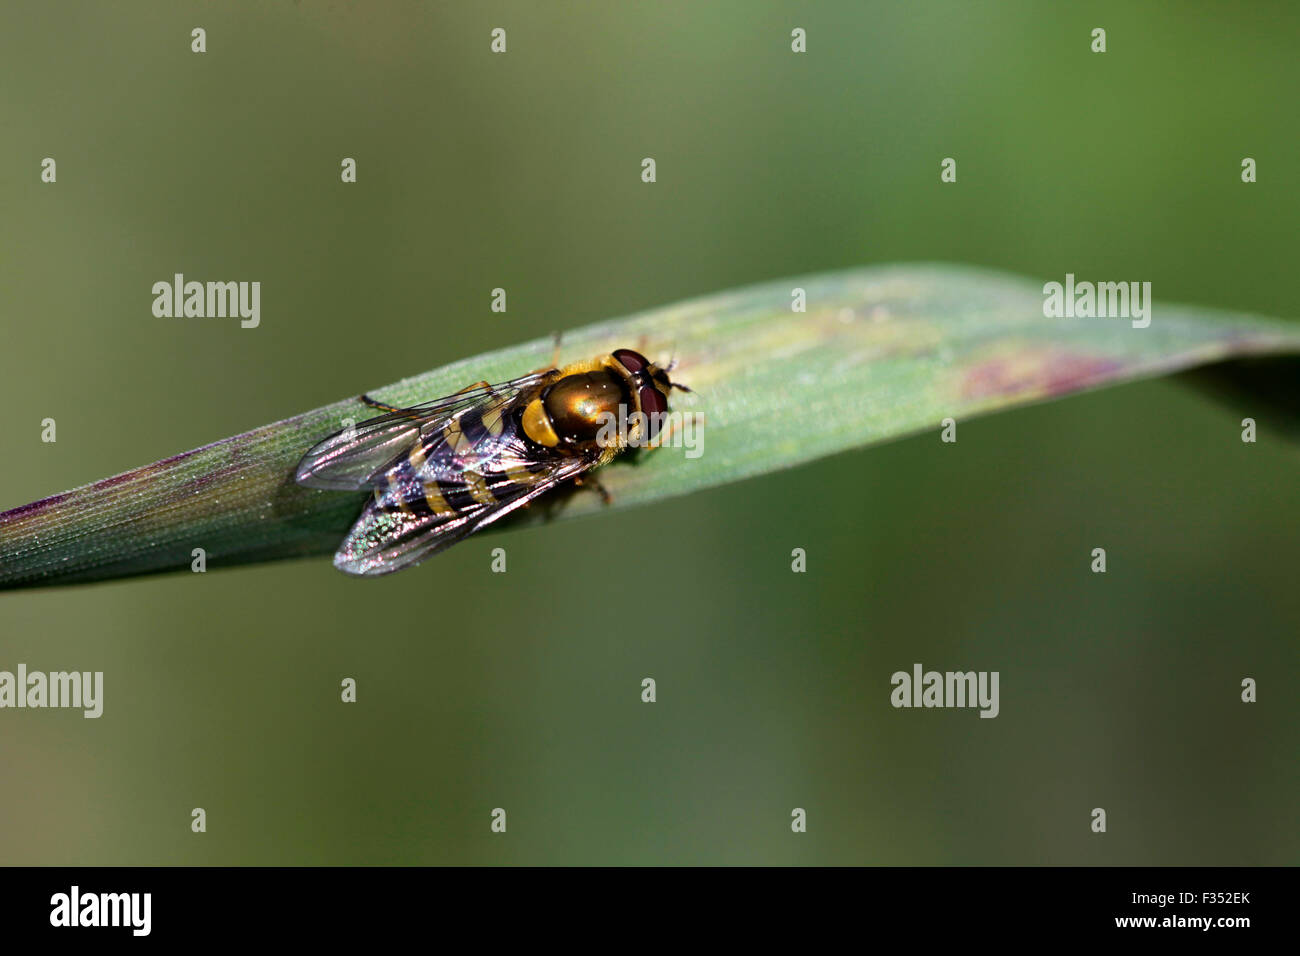 Hoverfly, flower fly, sweet bee, syrphid fly Stock Photo